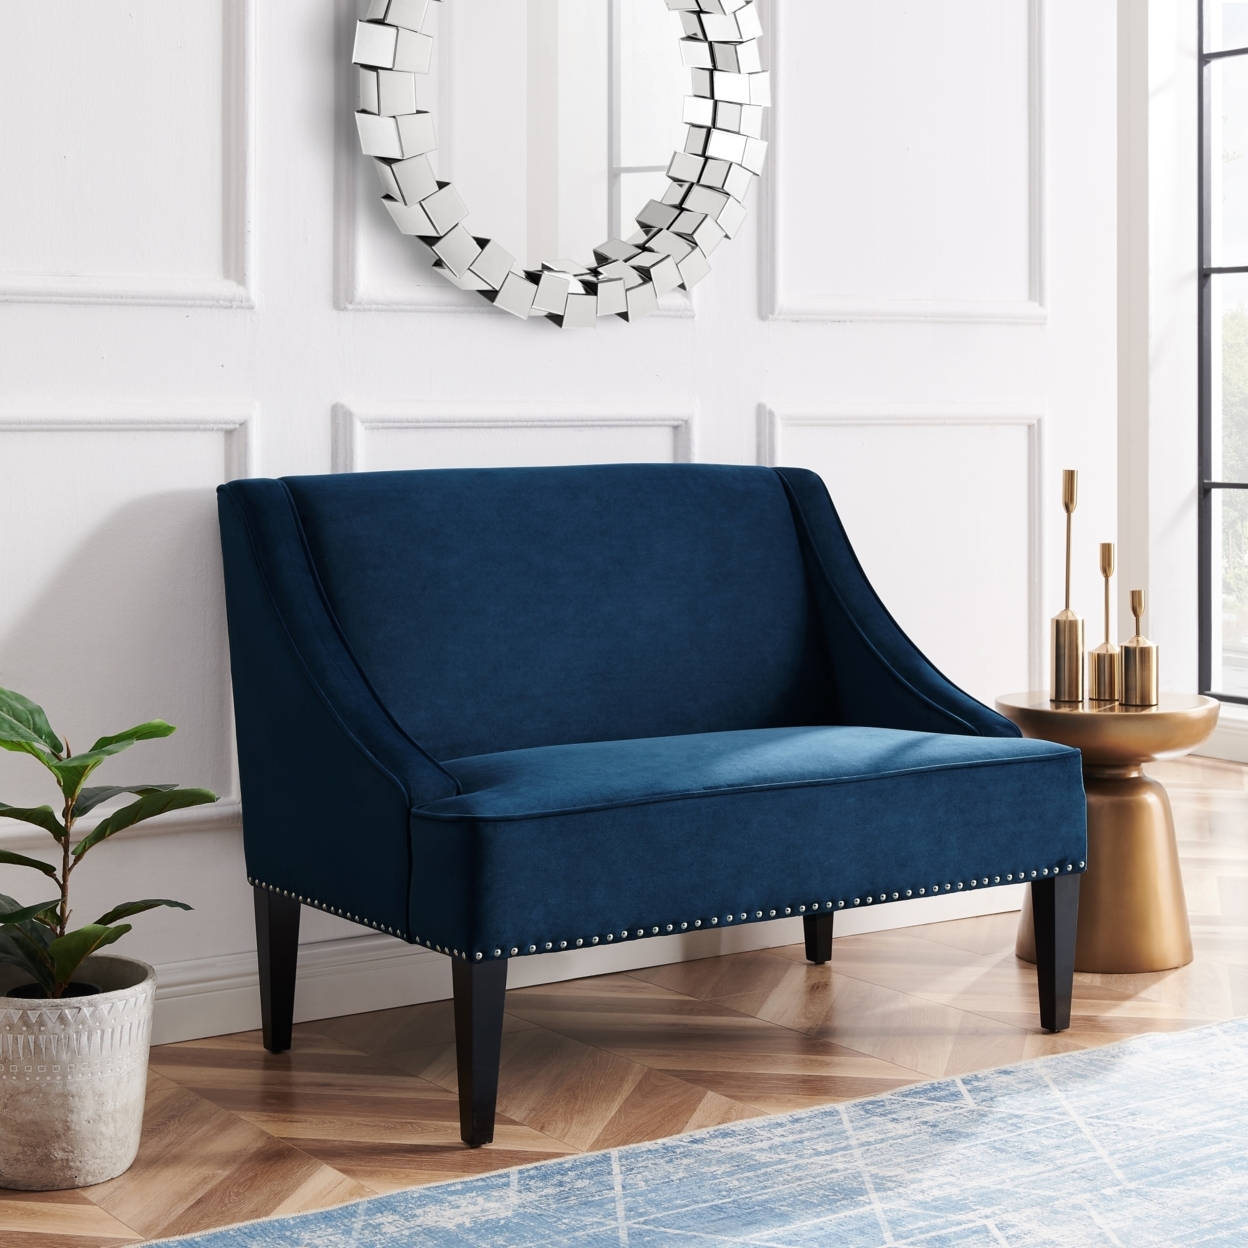 Janessa Velvet Bench - Upholstered With Swoop Arms - Navy